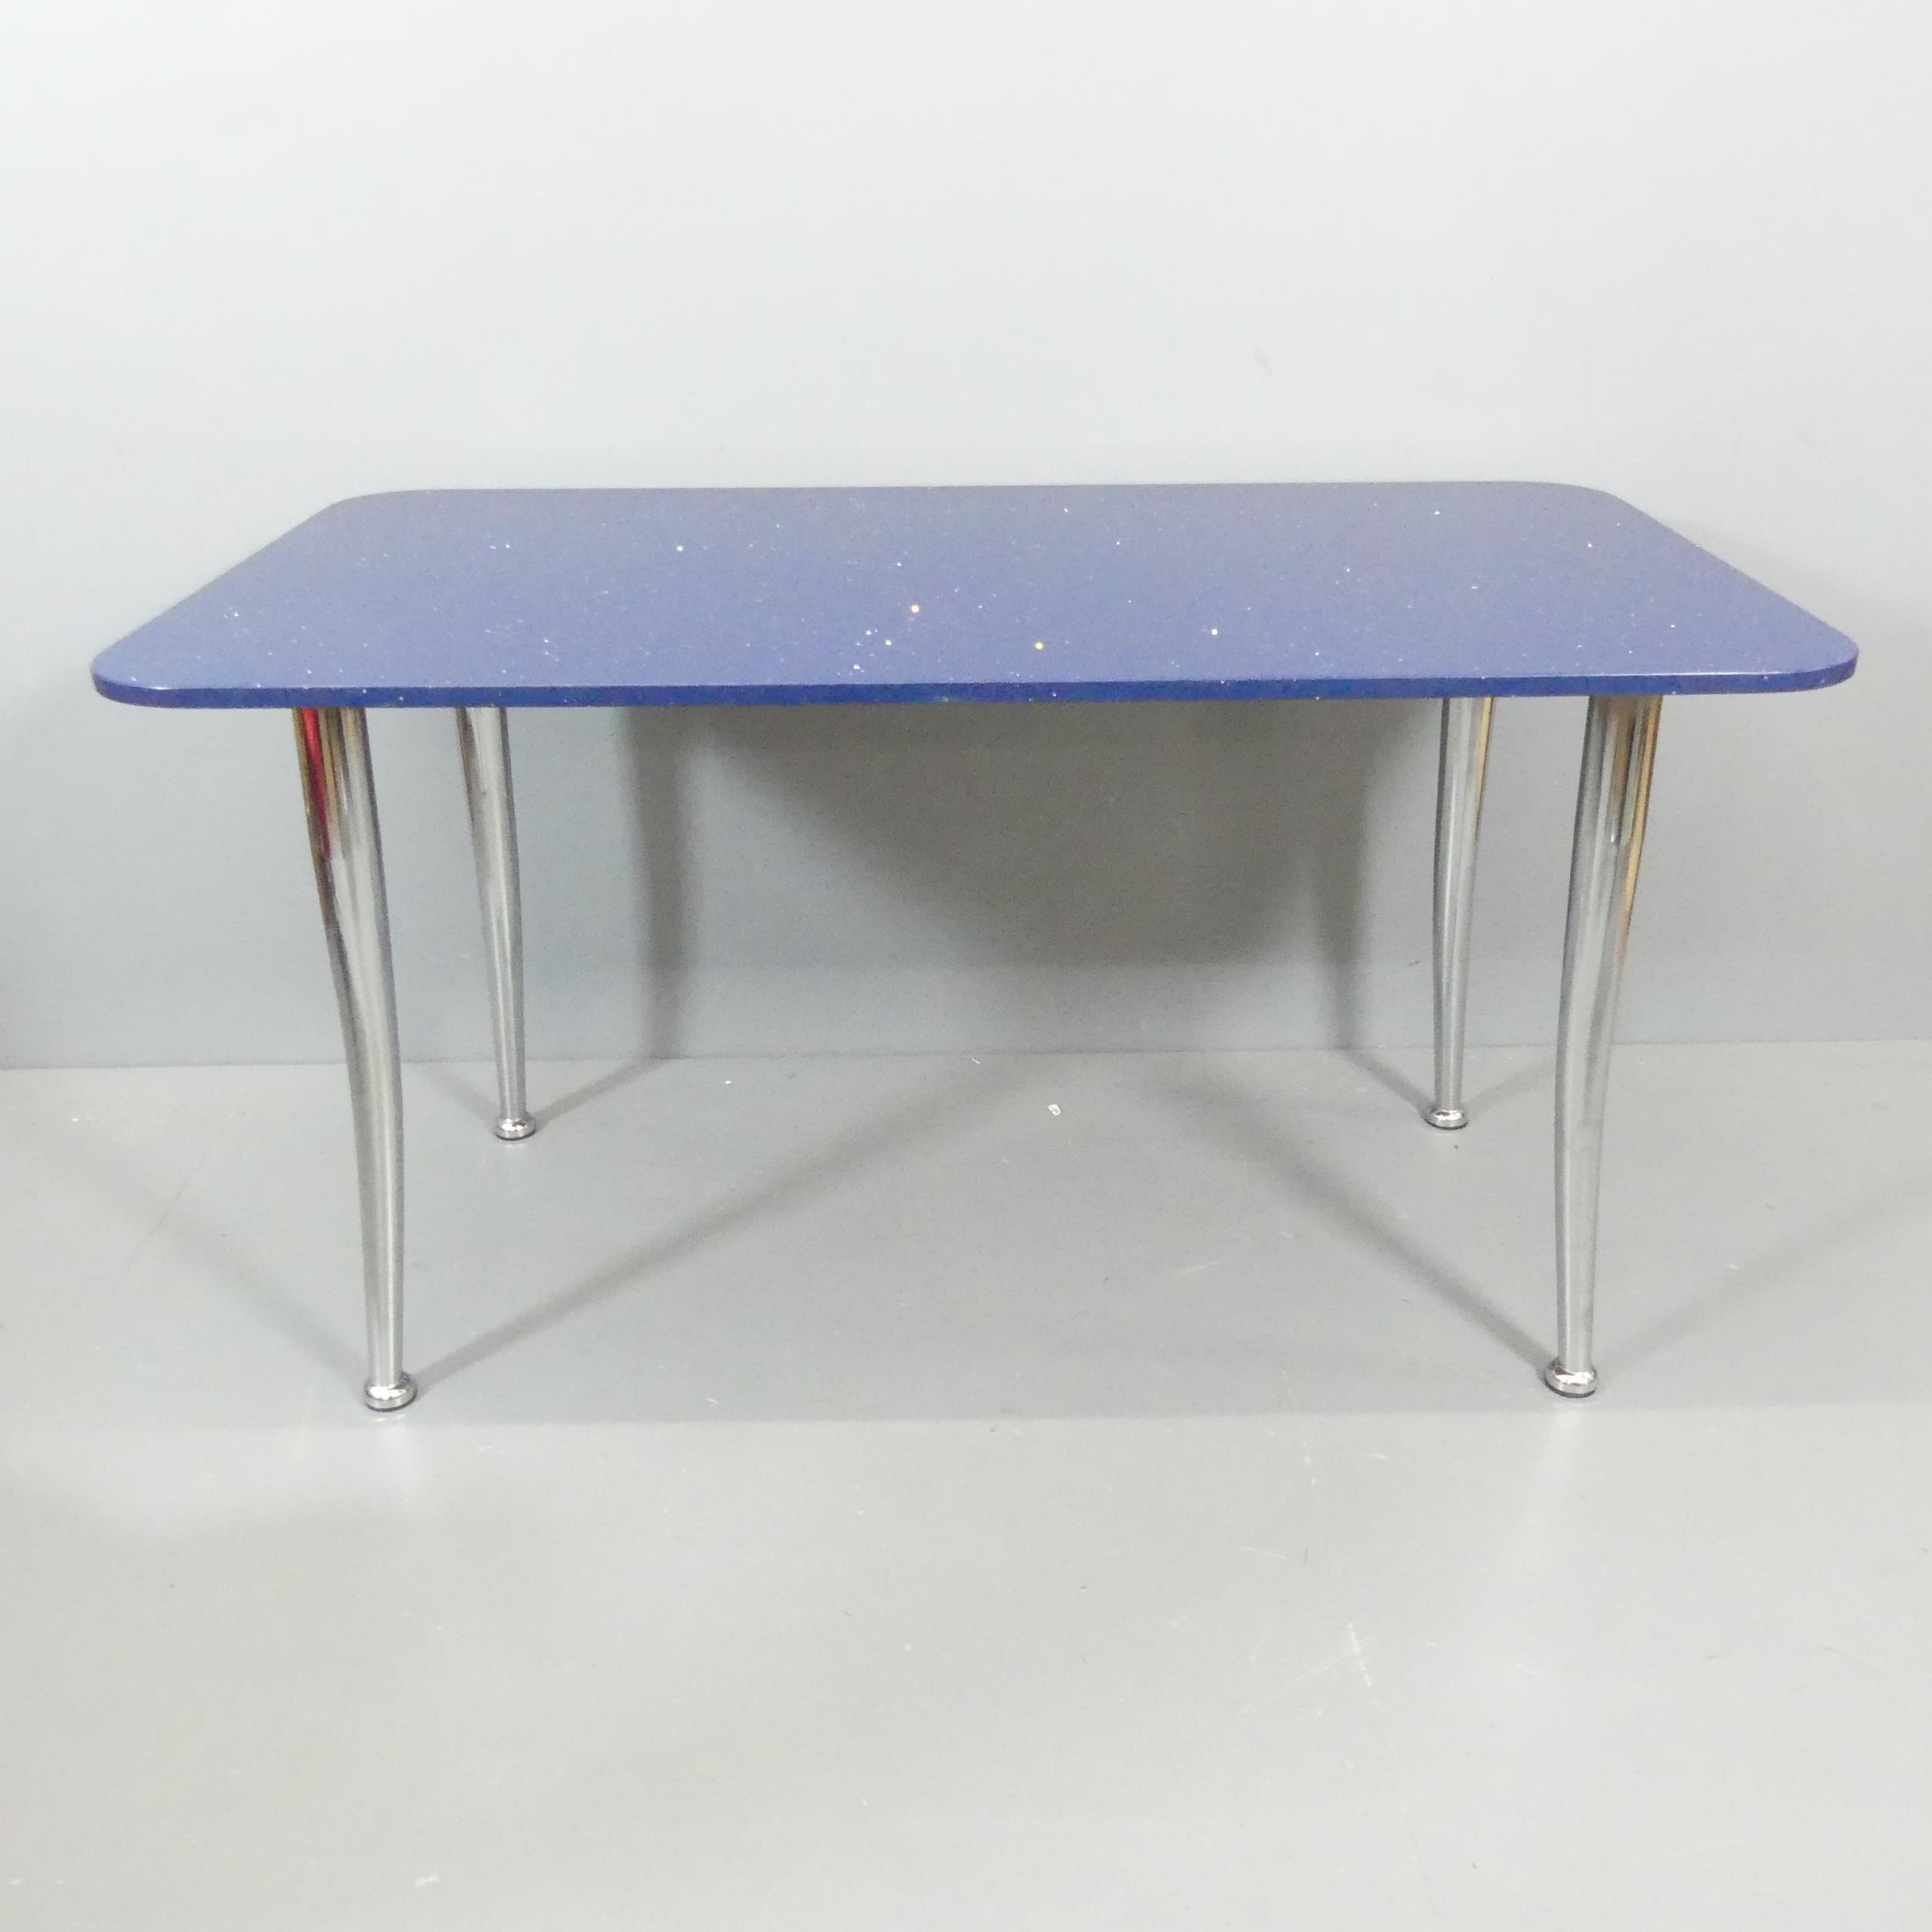 A 1980s dining table with sparkle blue quartz stone top on chrome swept out legs. 140x75x80cm.